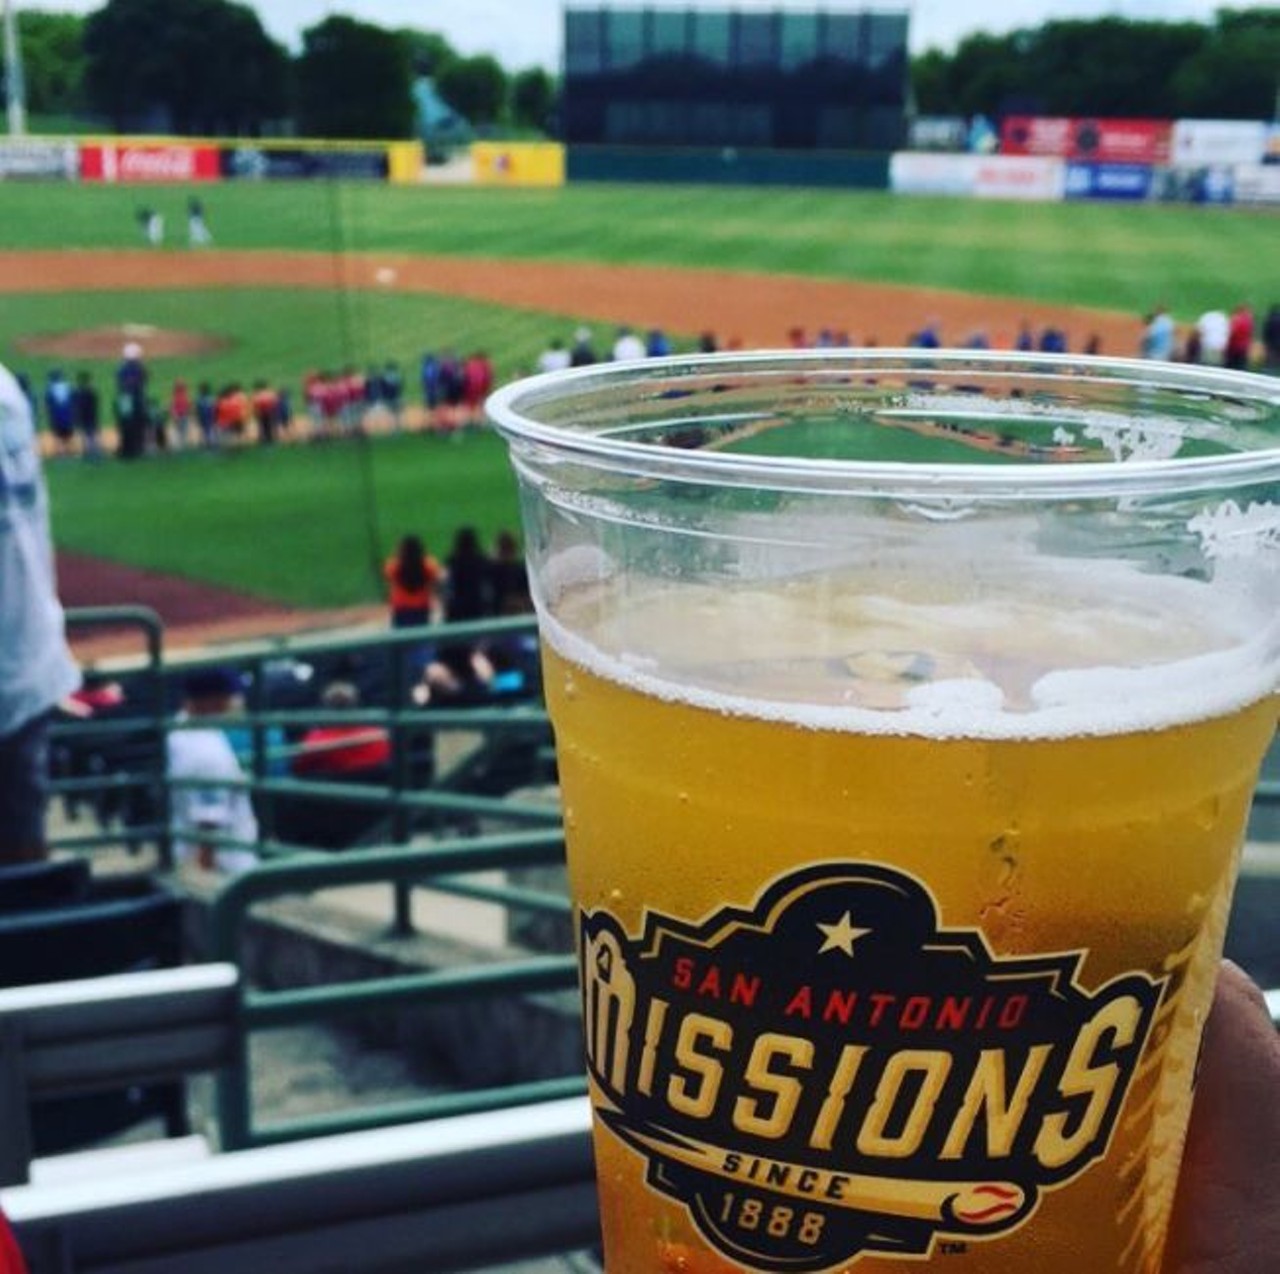  Take advantage of dollar night at a Missions game
Dollar hot dogs, dollar popcorn, dollar soda, and you guessed it &#151; dollar beers. Grab a cold one 
(or two or three) while rooting for the San Antonio Missions and revel in the fact that you're wallet will still be full by the time the game is over. 
Photo via Instagram, jpina85